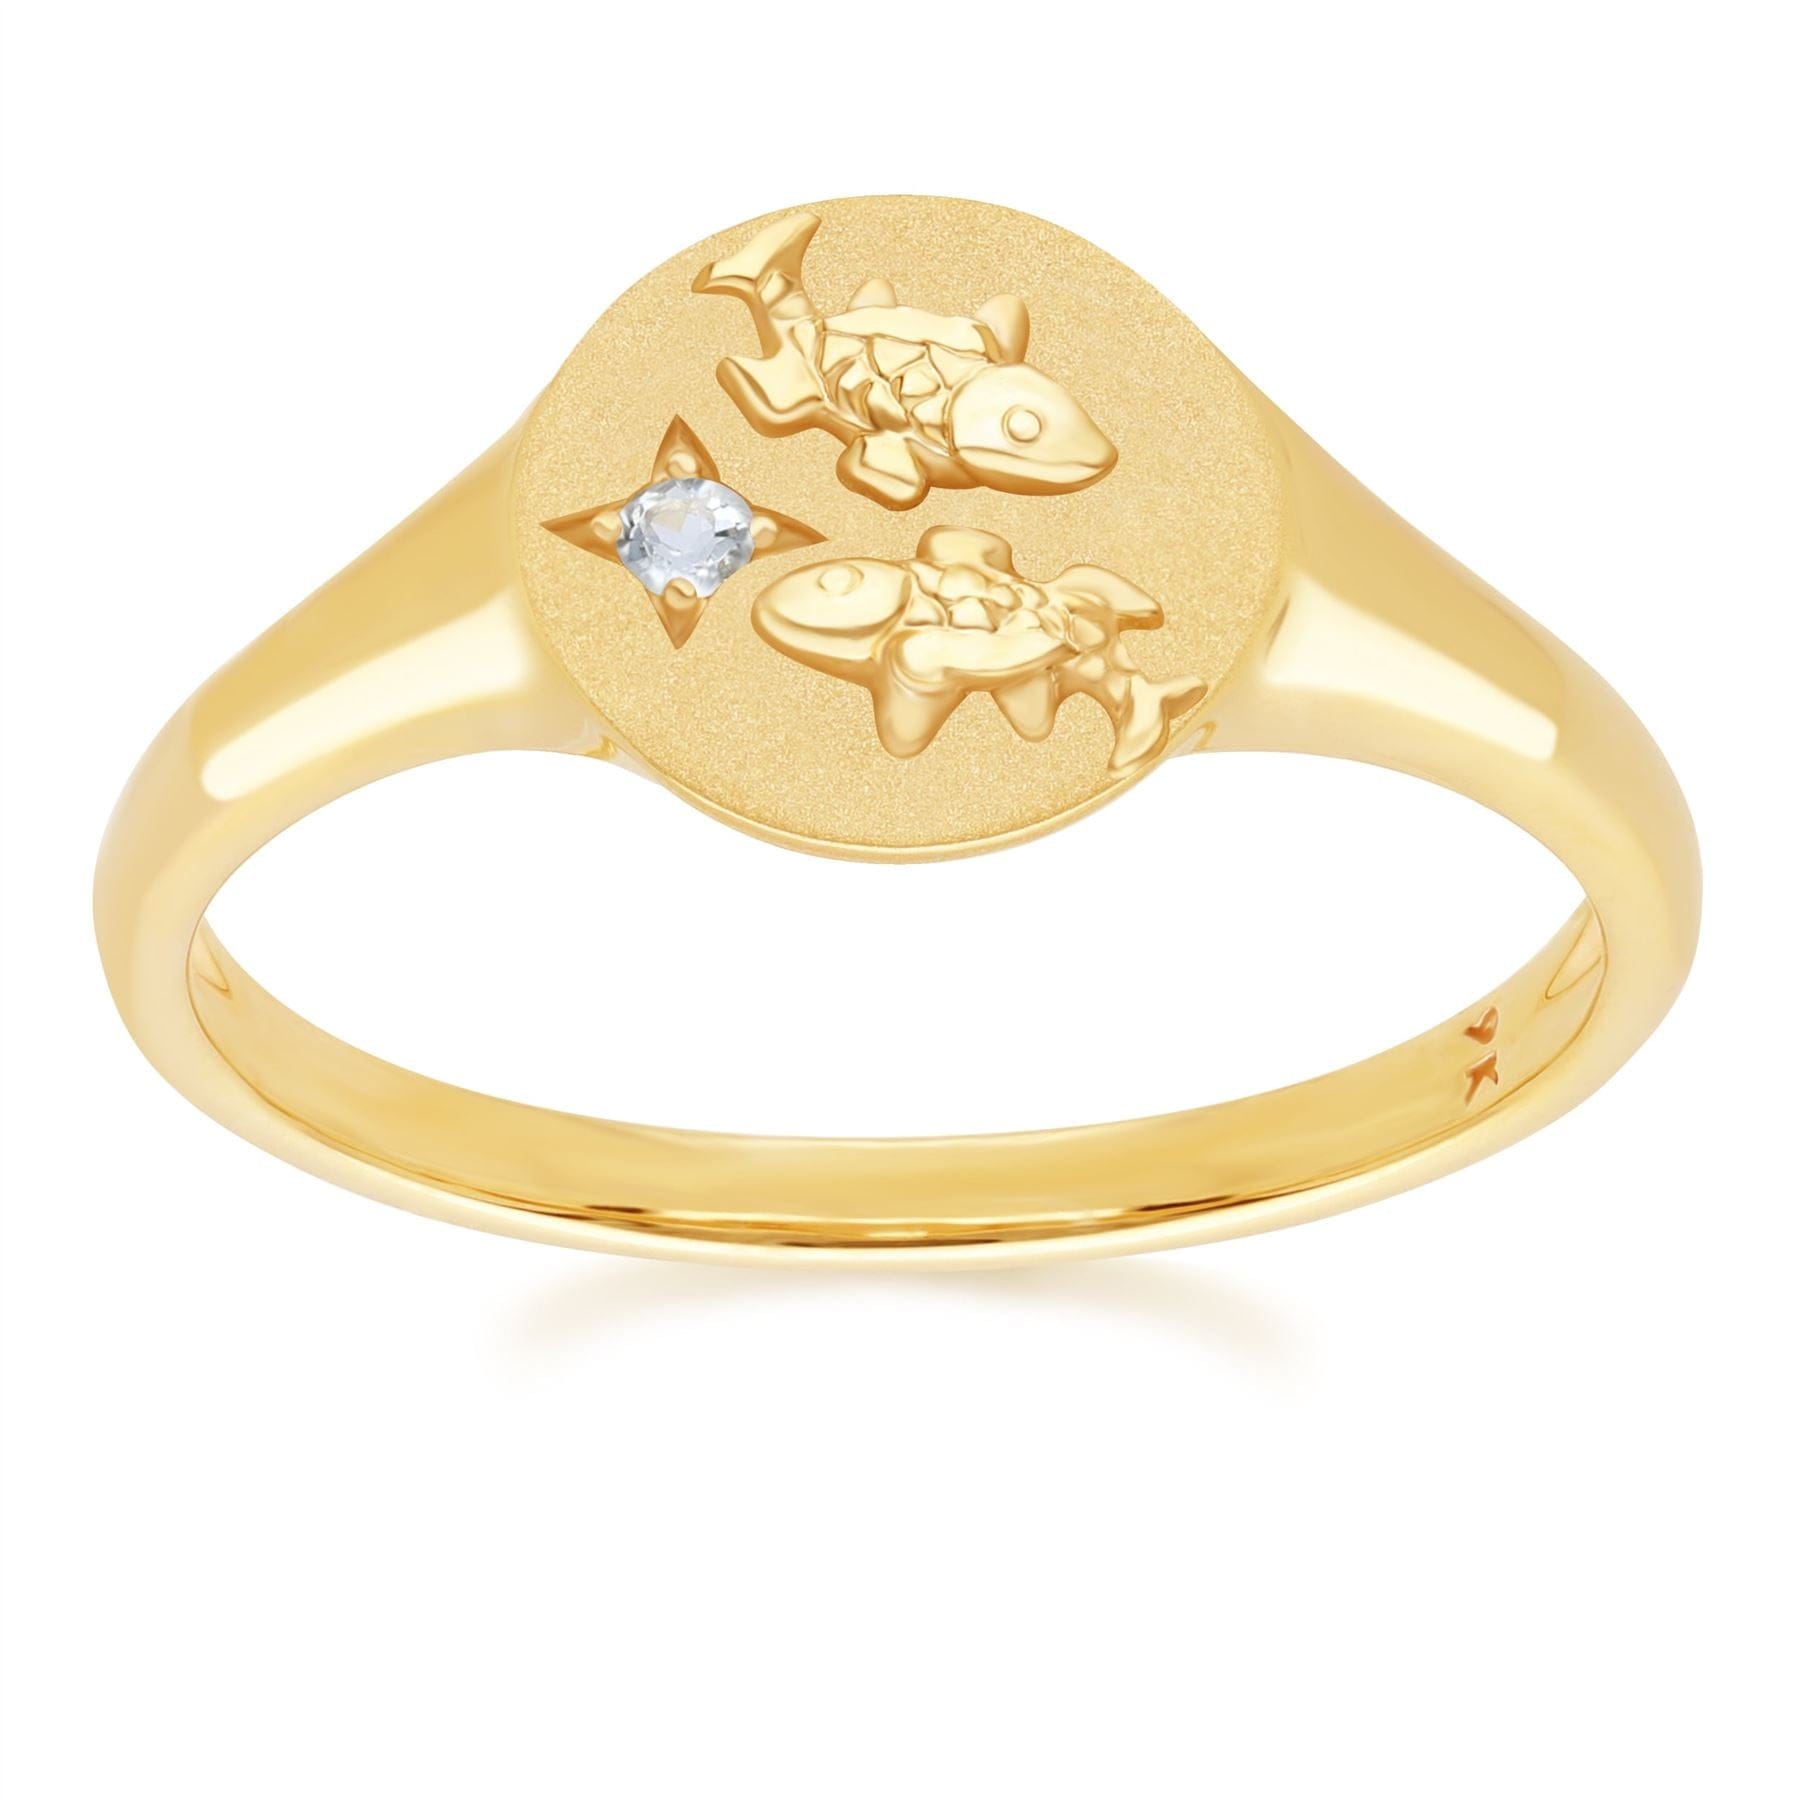 Zodiac  Pisces Signet Ring with Aquamarine In 9ct Yellow GoldFront  135R2081019